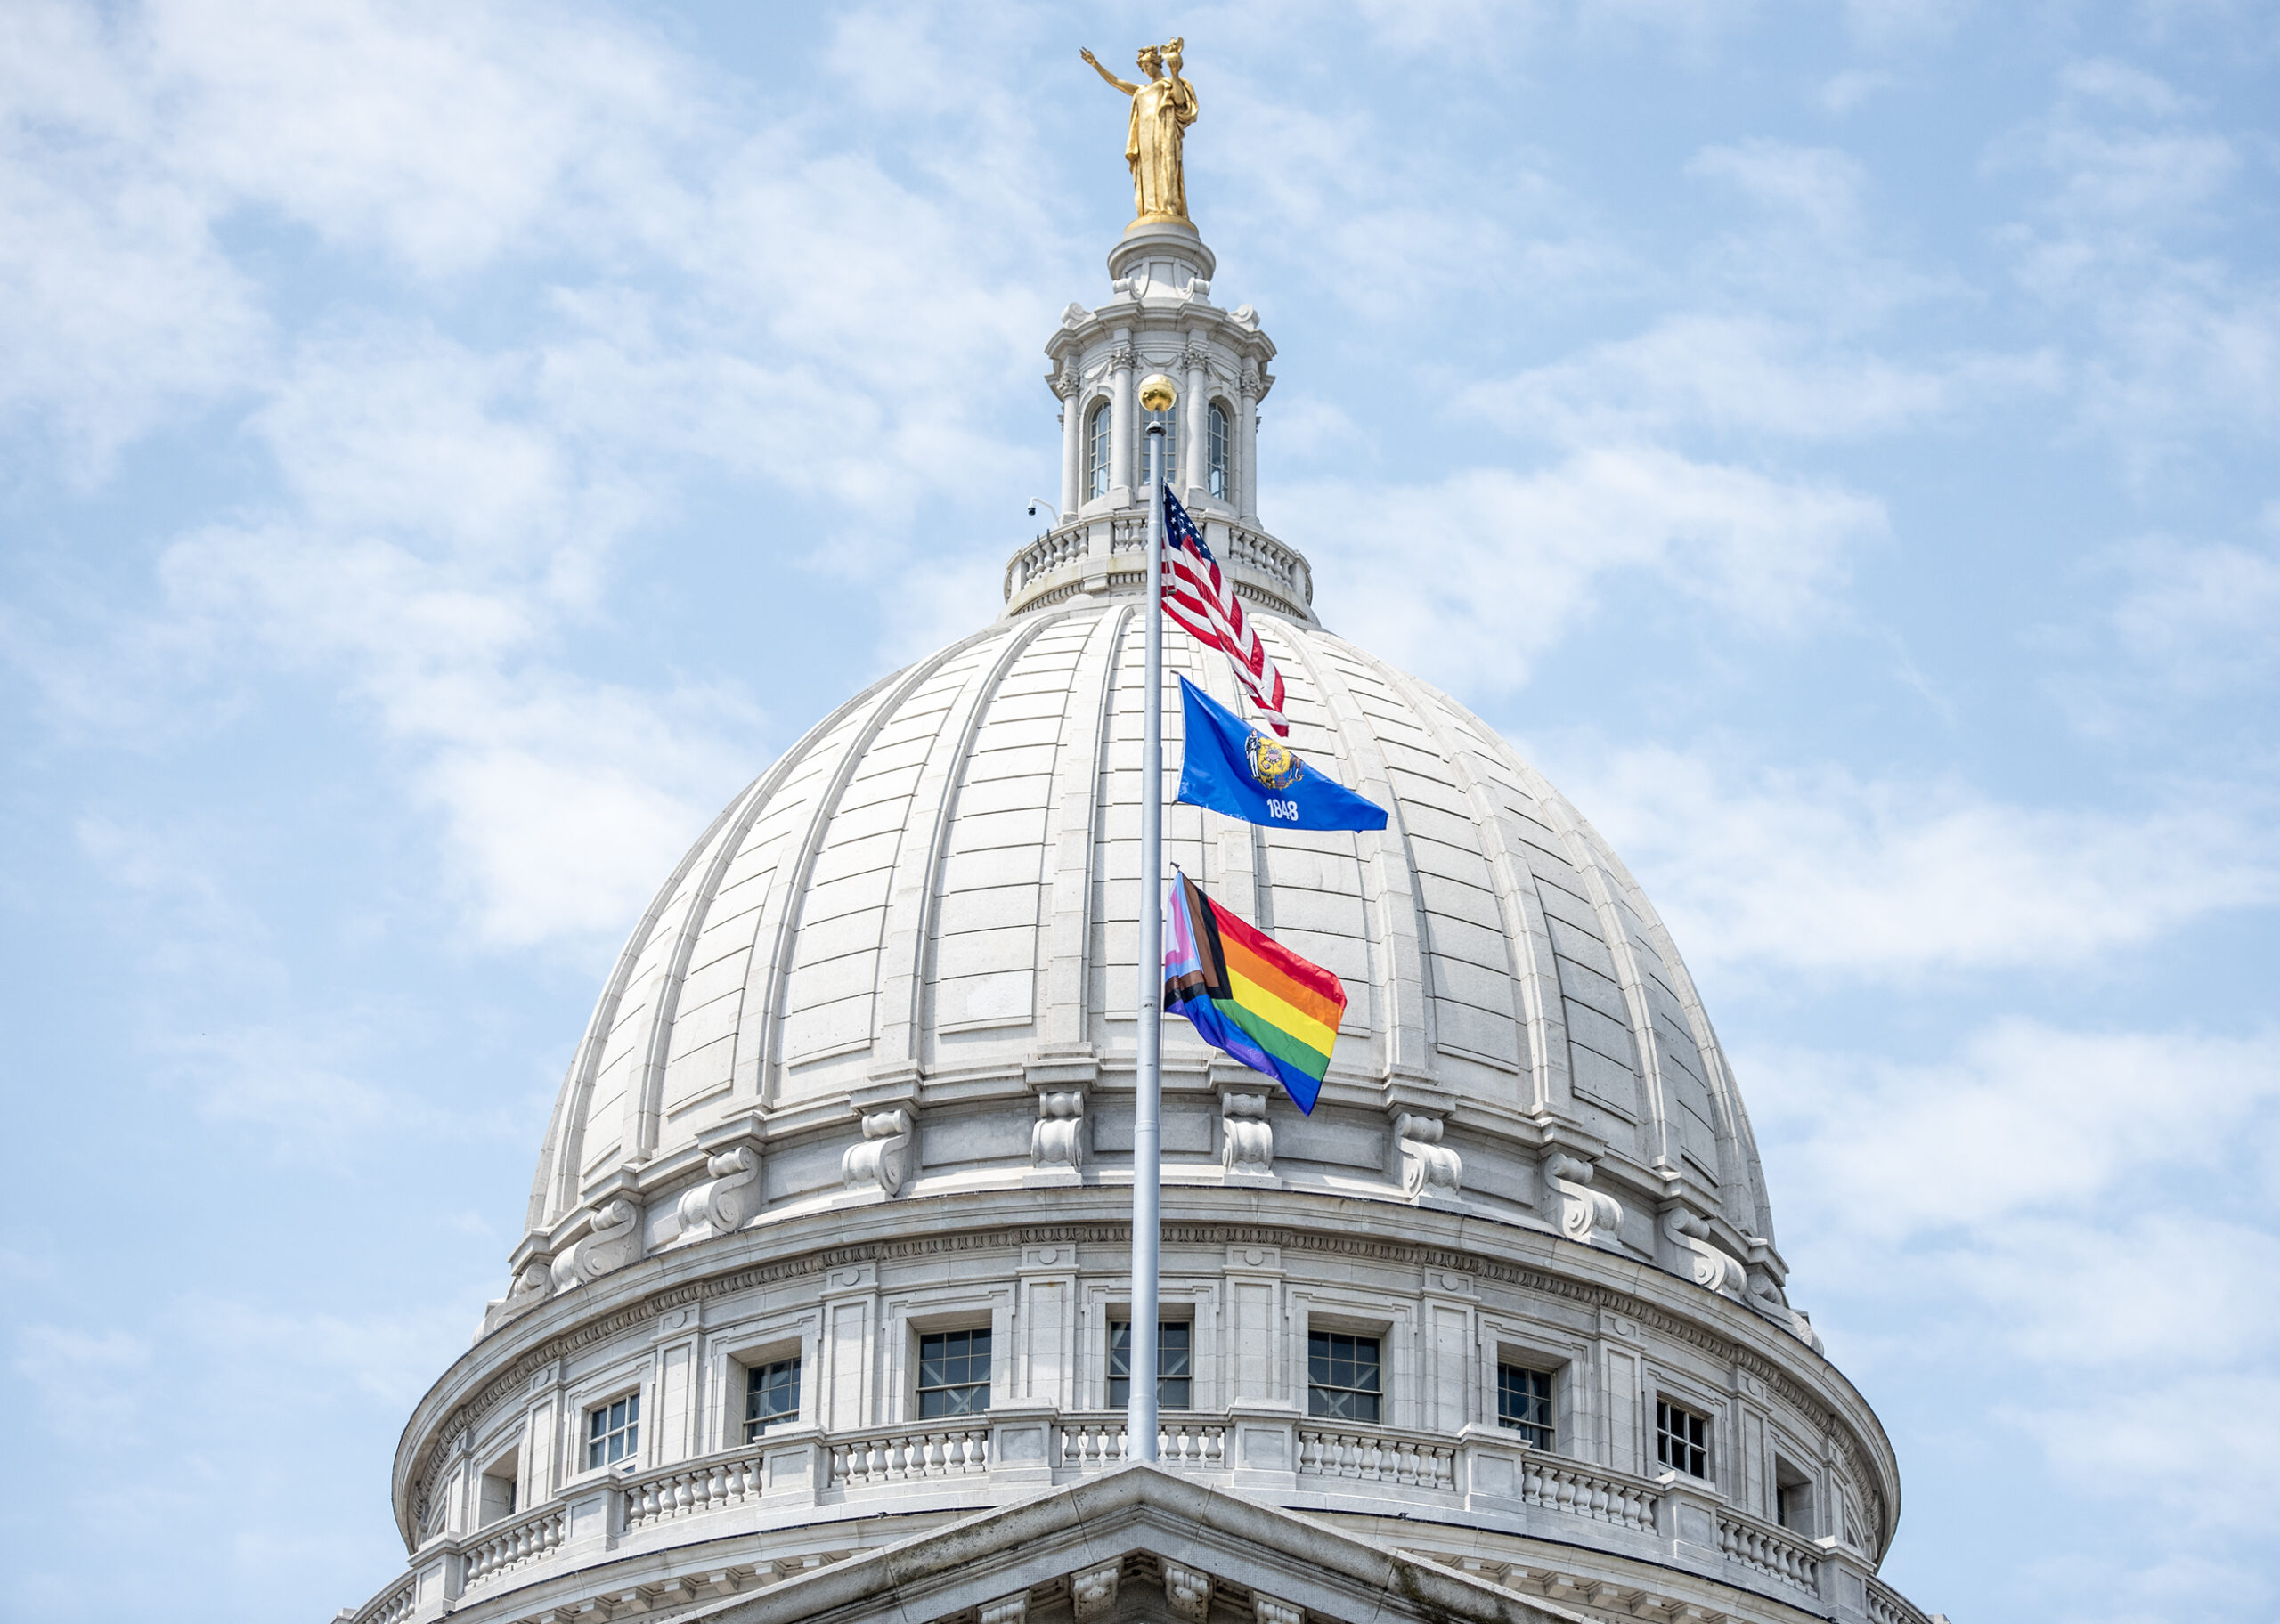 The dome of the Wisconsin State Capitol is seen from the outside. The U.S. flag, the Wisconsin state flag, and the Pride flag fly on a pole.